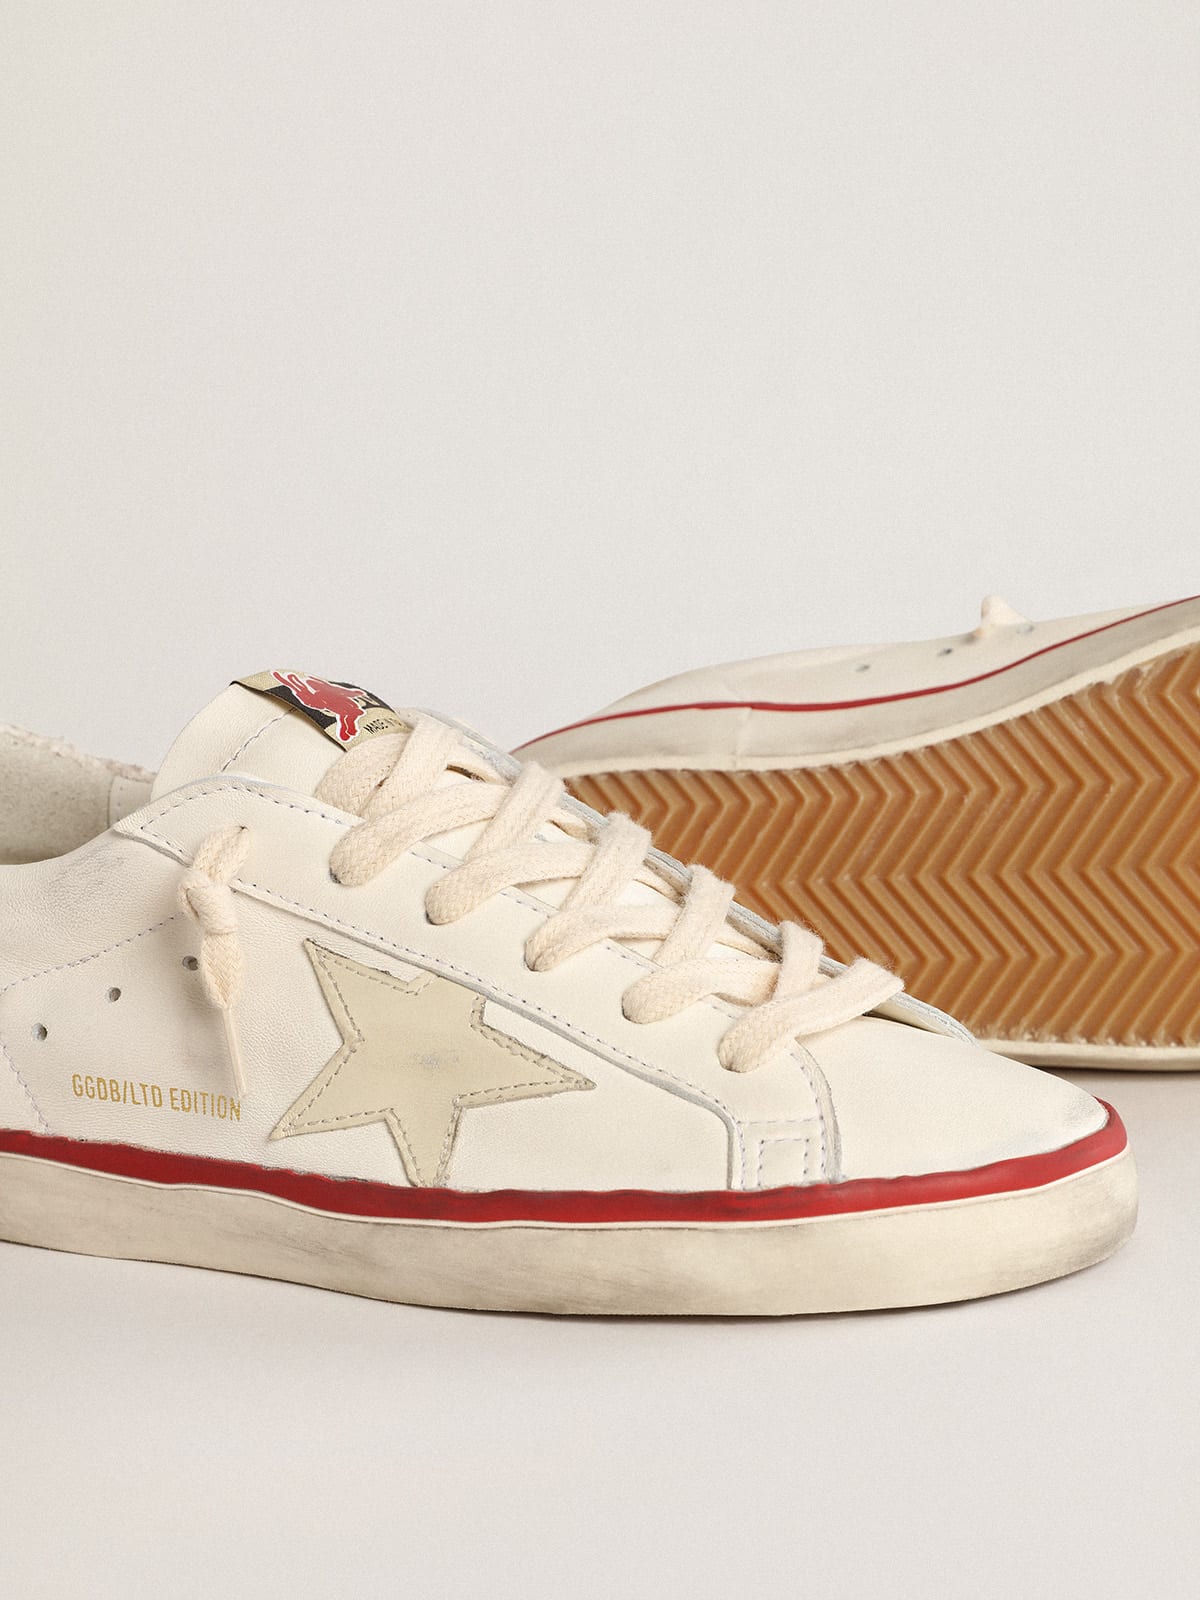 Golden Goose - Women’s Super-Star LTD CNY in nappa leather with ivory star in 